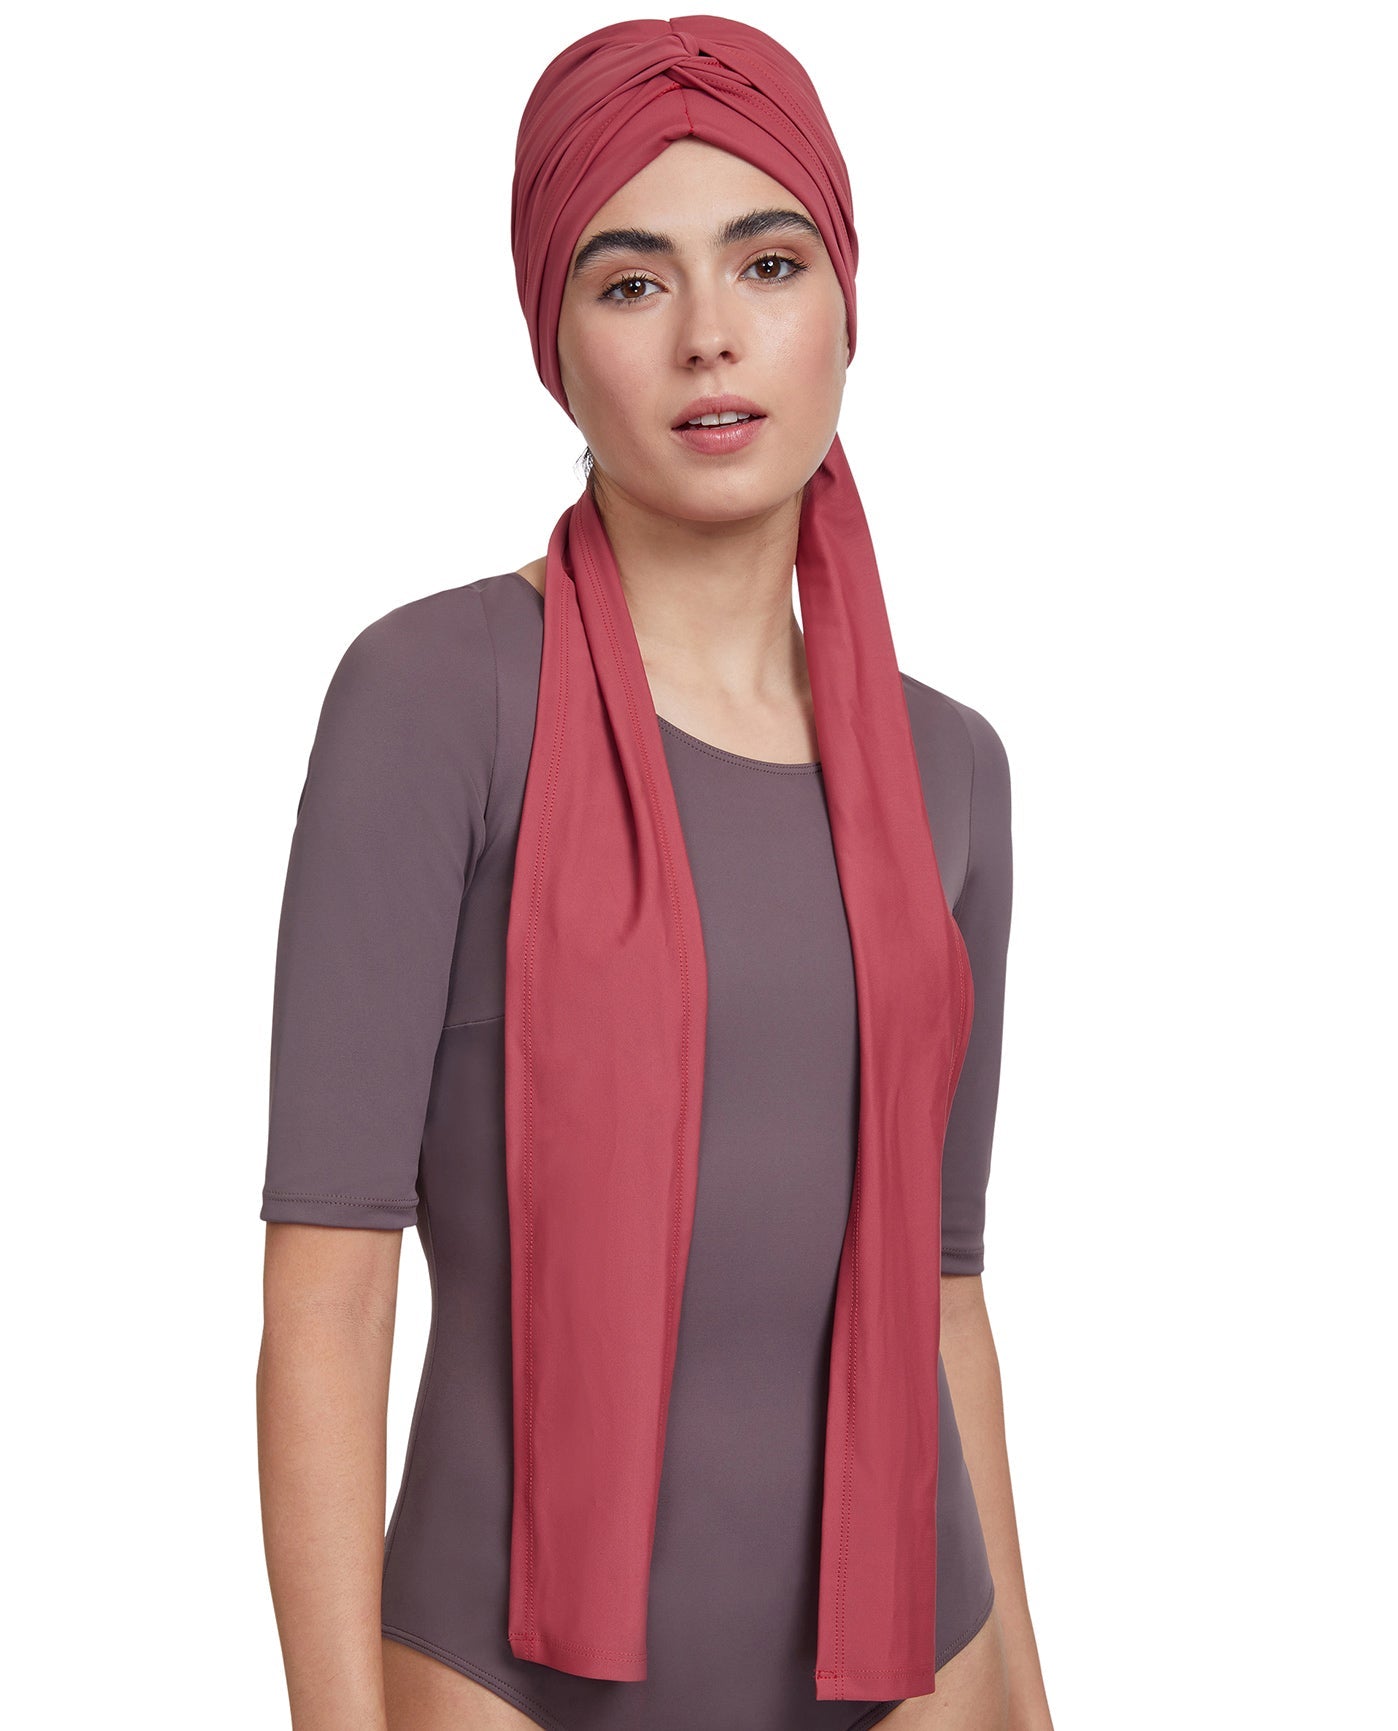 Front View Of Gottex Modest Hair Covering With Tie | GOTTEX MODEST BLUSH